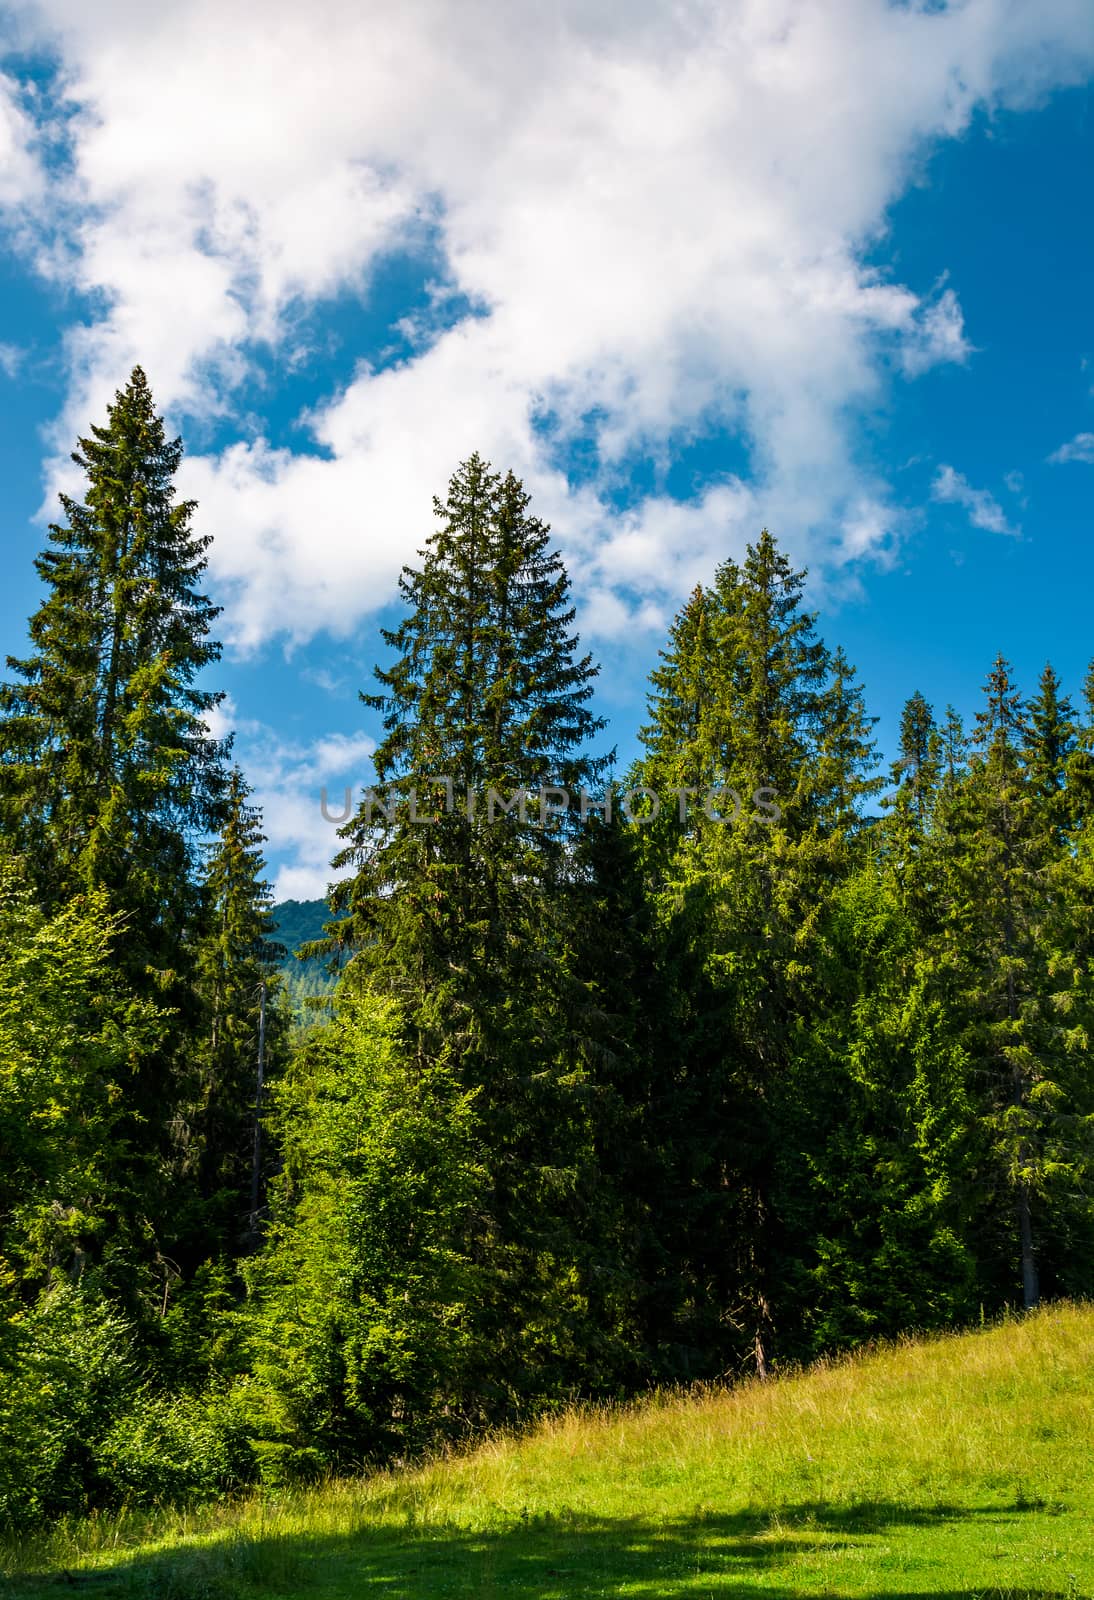 spruce forest on a grassy meadow by Pellinni